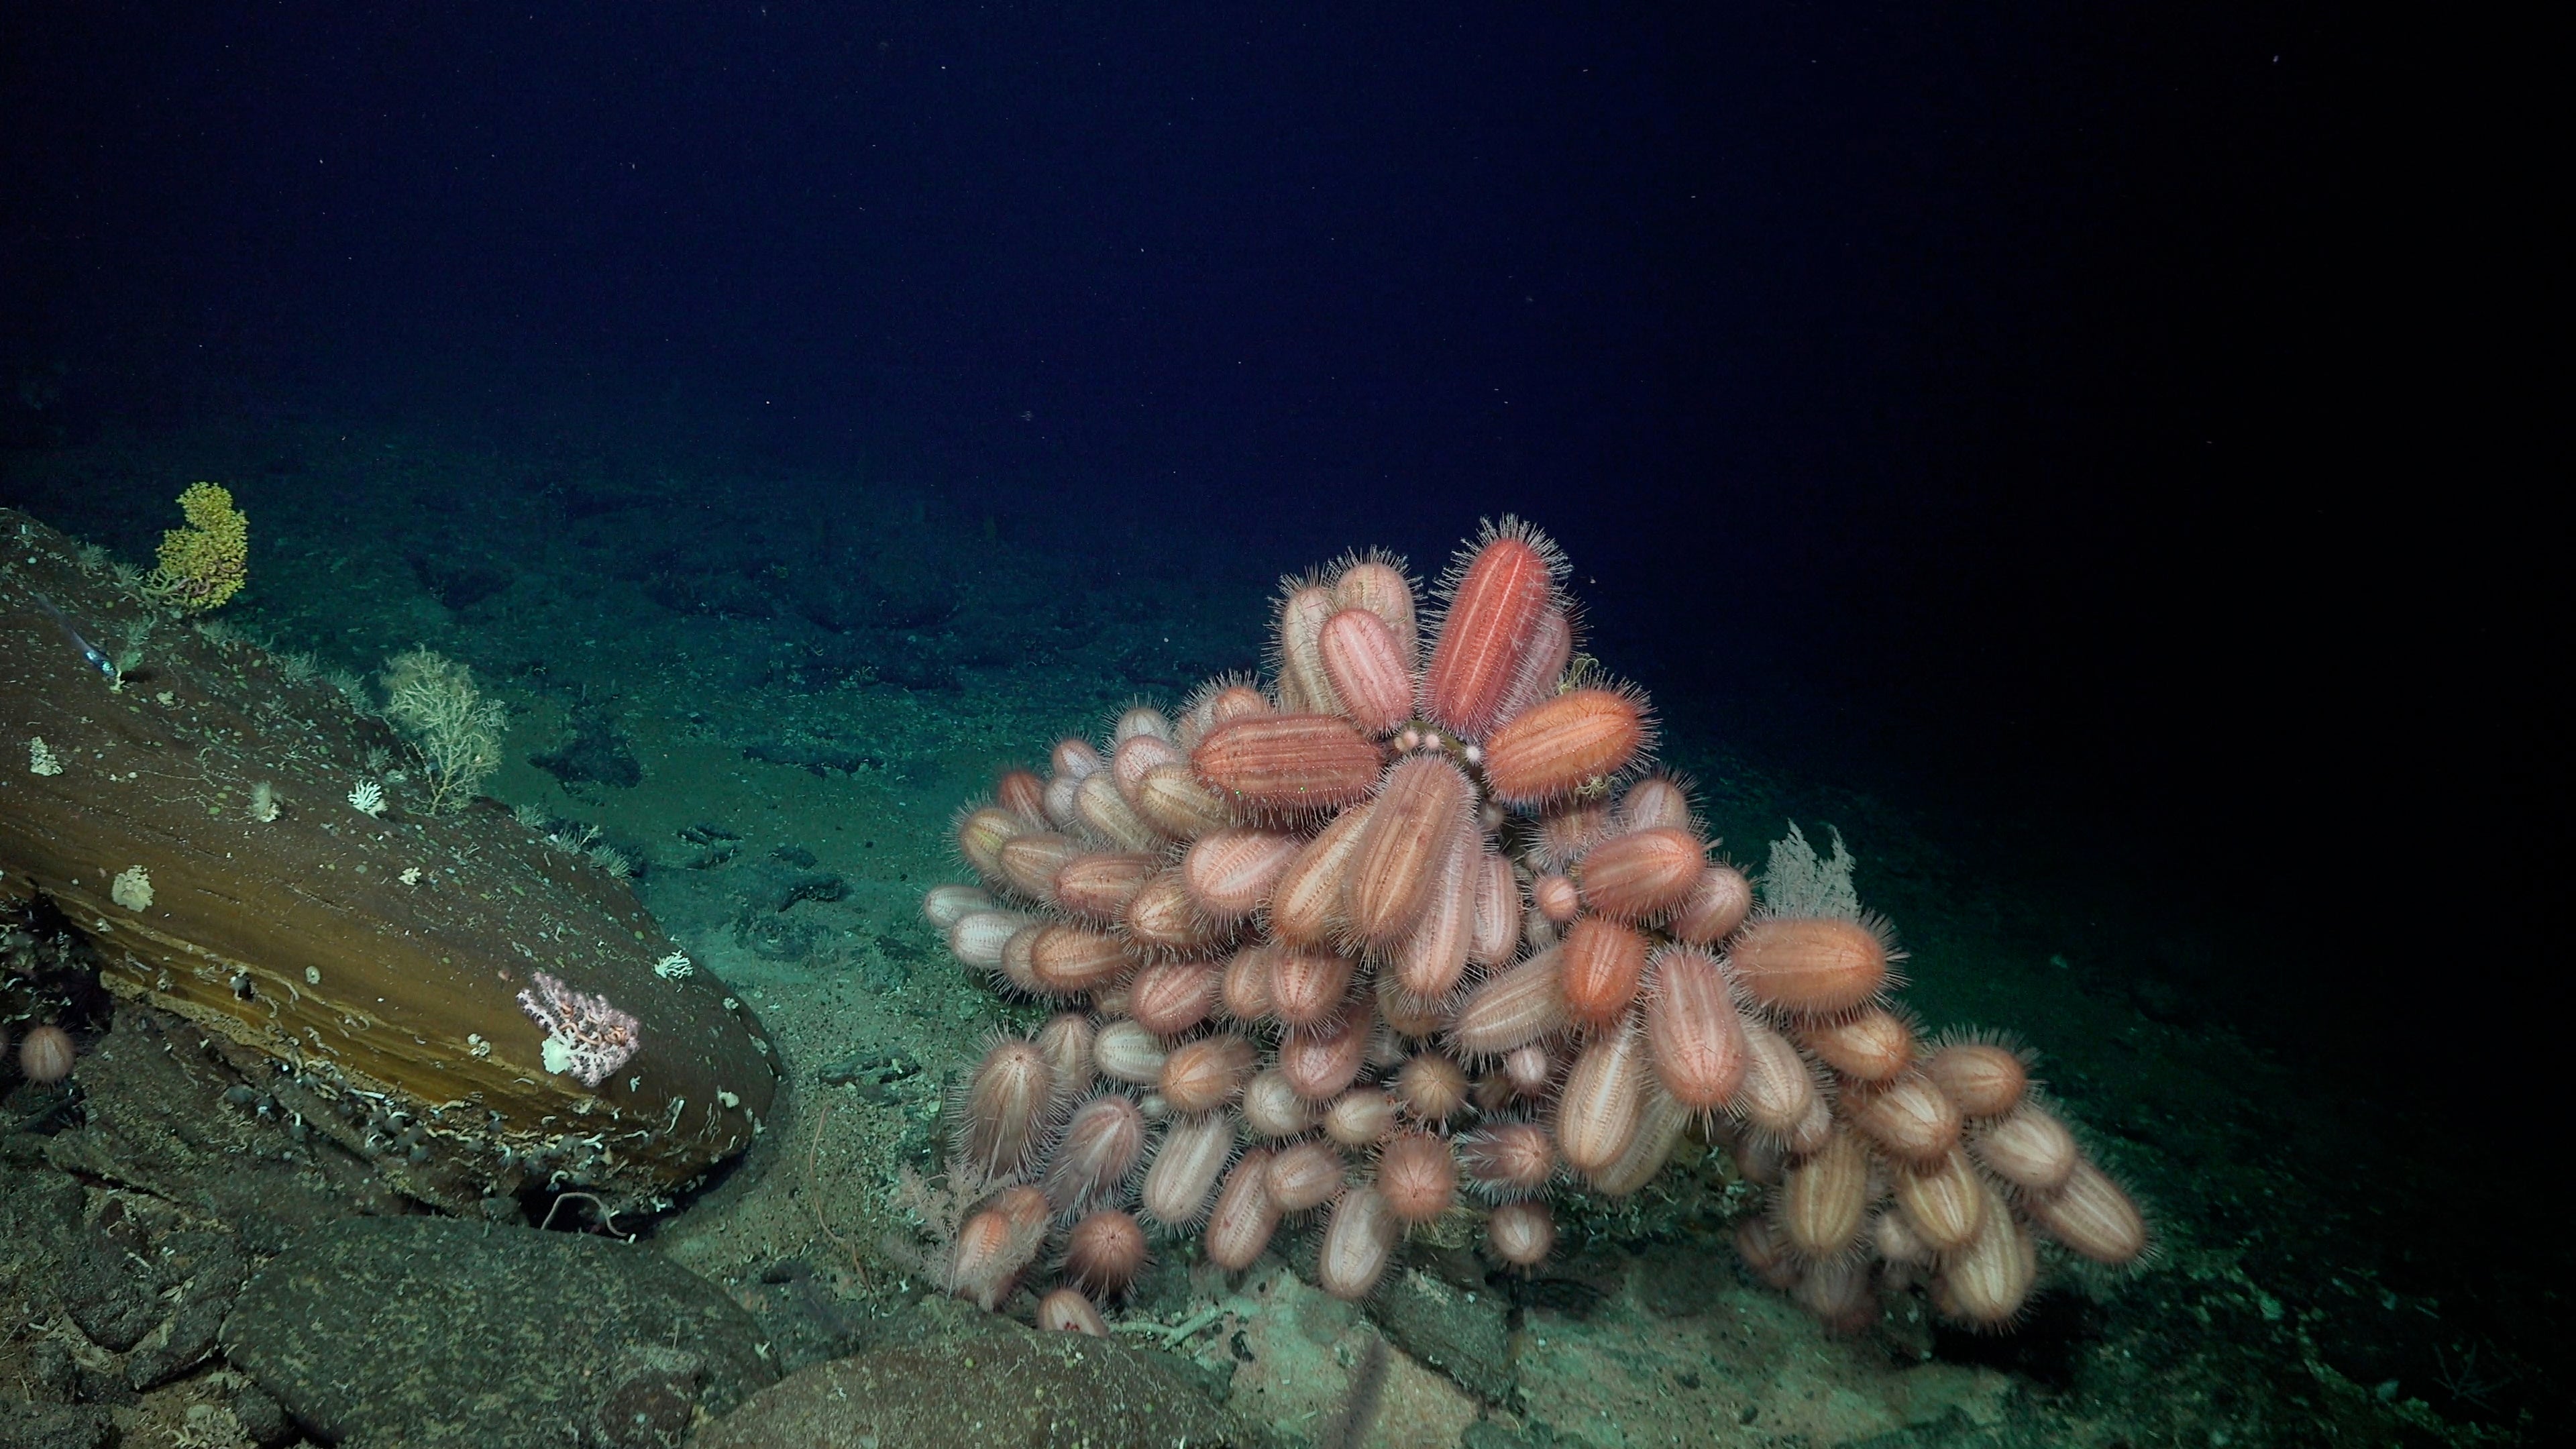 Oblong Dermechinus urchins documented at a depth of 516 meters along the ridge